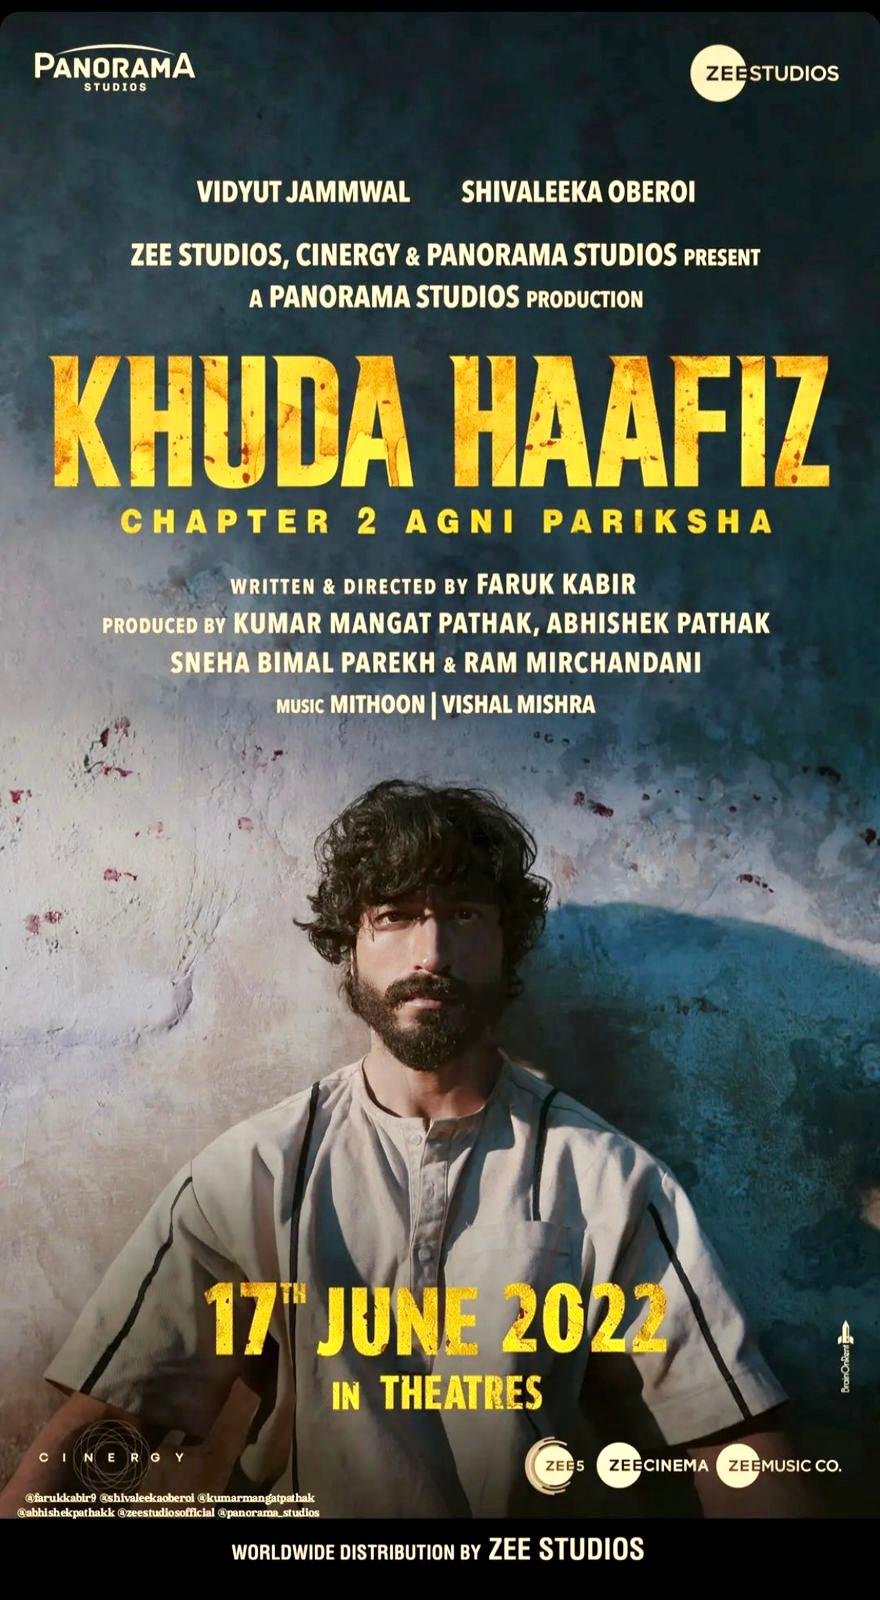 You are currently viewing Vidyut Jamwal and director Faruk Kabir sets the internet frenzy with Khuda Haafiz Chapter 2 poster.